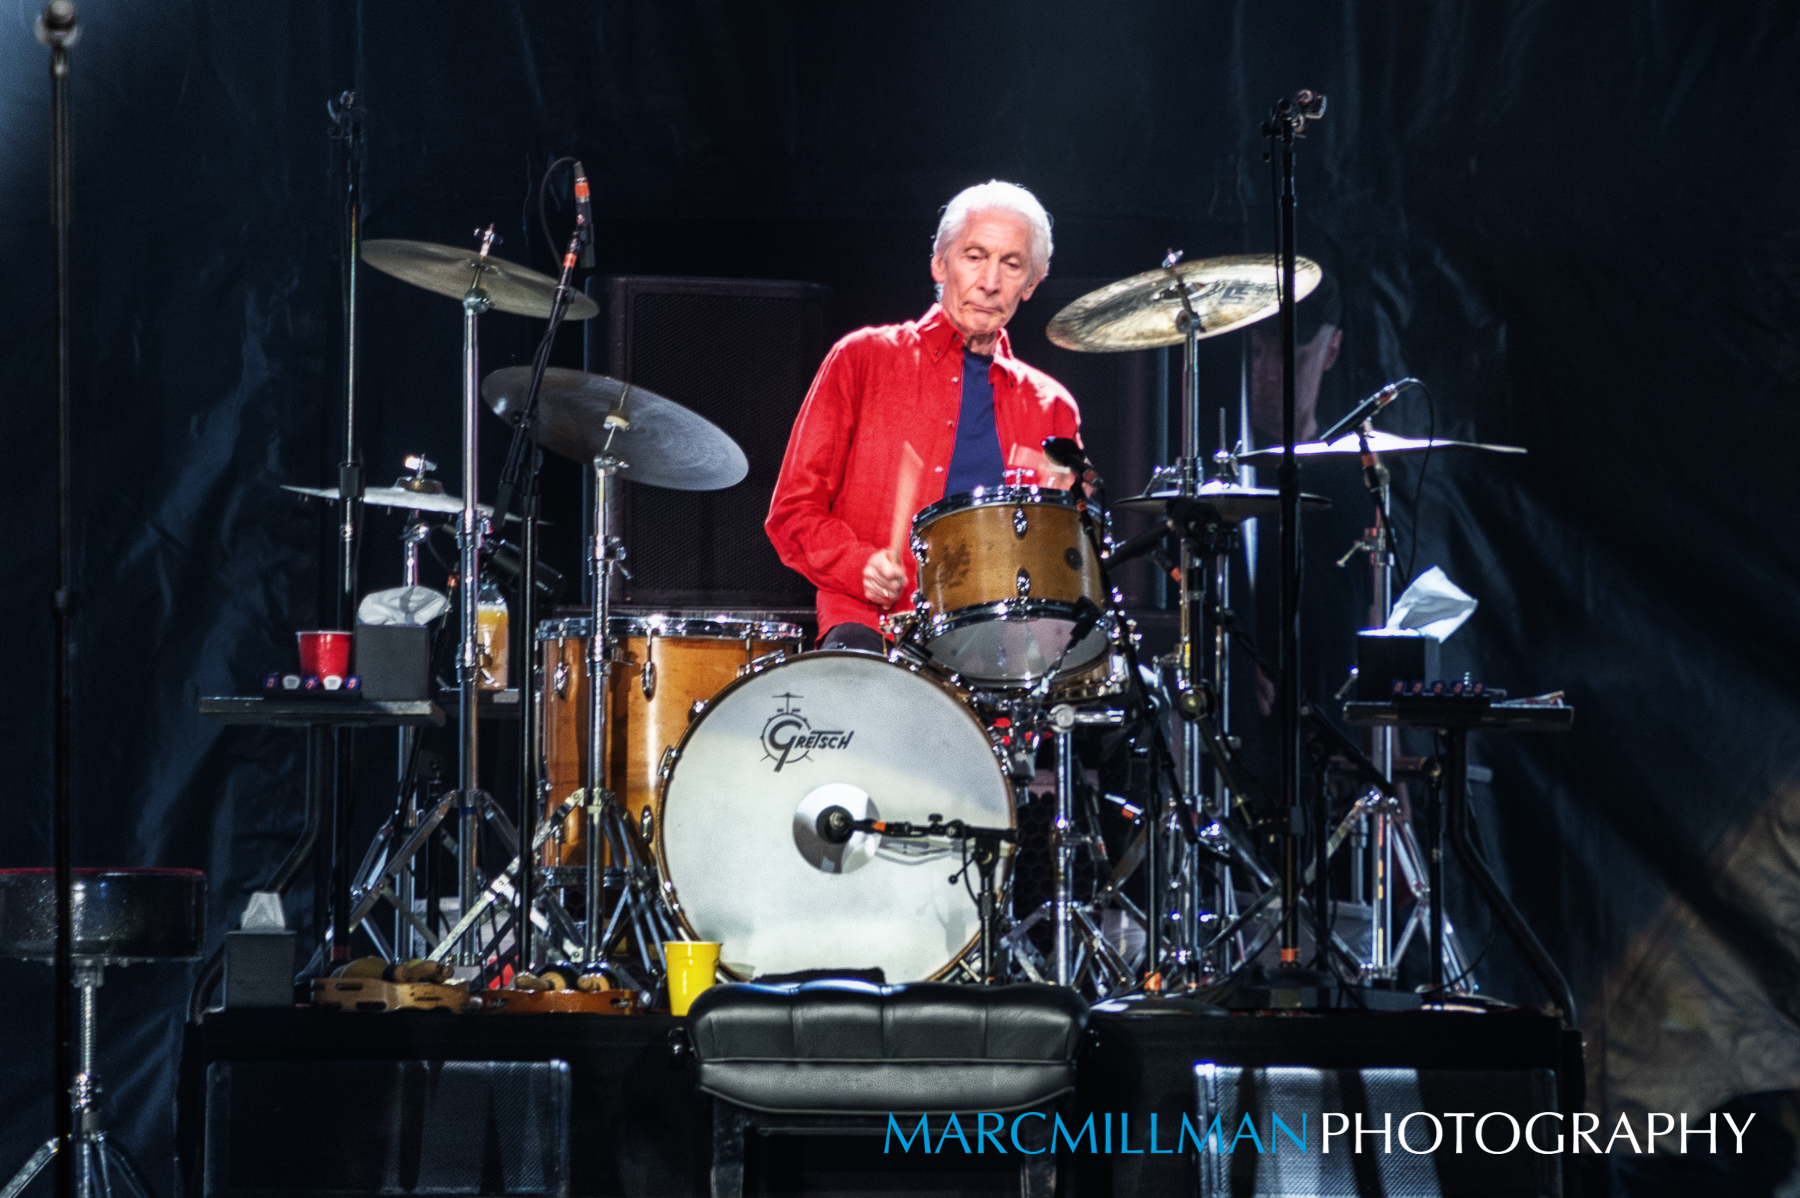 R.I.P.: Charlie Watts, Drummer for The Rolling Stones